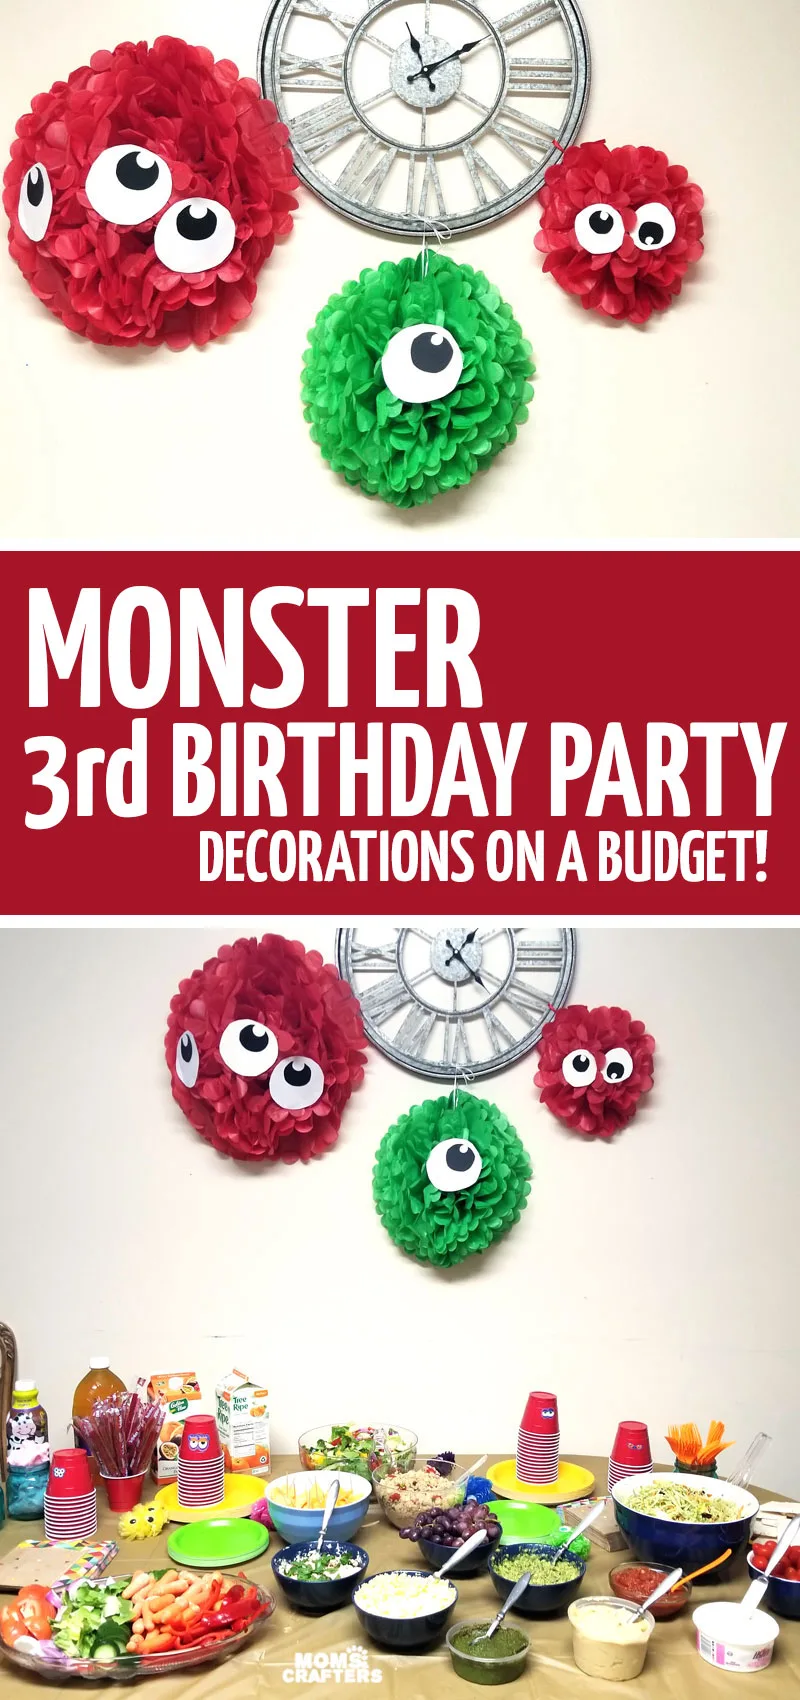 Click for easy DIY monster party decorations for a hairy monster themed birthday party. This was my son's first haircut, and is great for upsherin ideas and themes. 